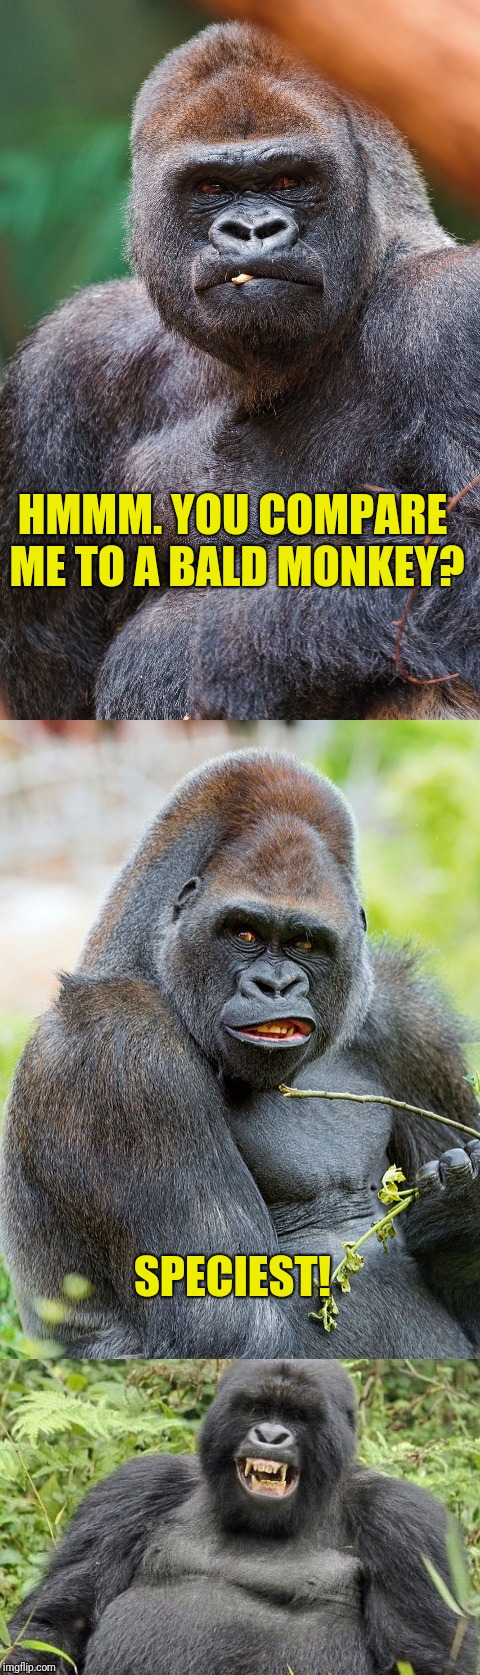 Social commentary gorilla  | HMMM. YOU COMPARE ME TO A BALD MONKEY? SPECIEST! | image tagged in social commentary gorilla | made w/ Imgflip meme maker